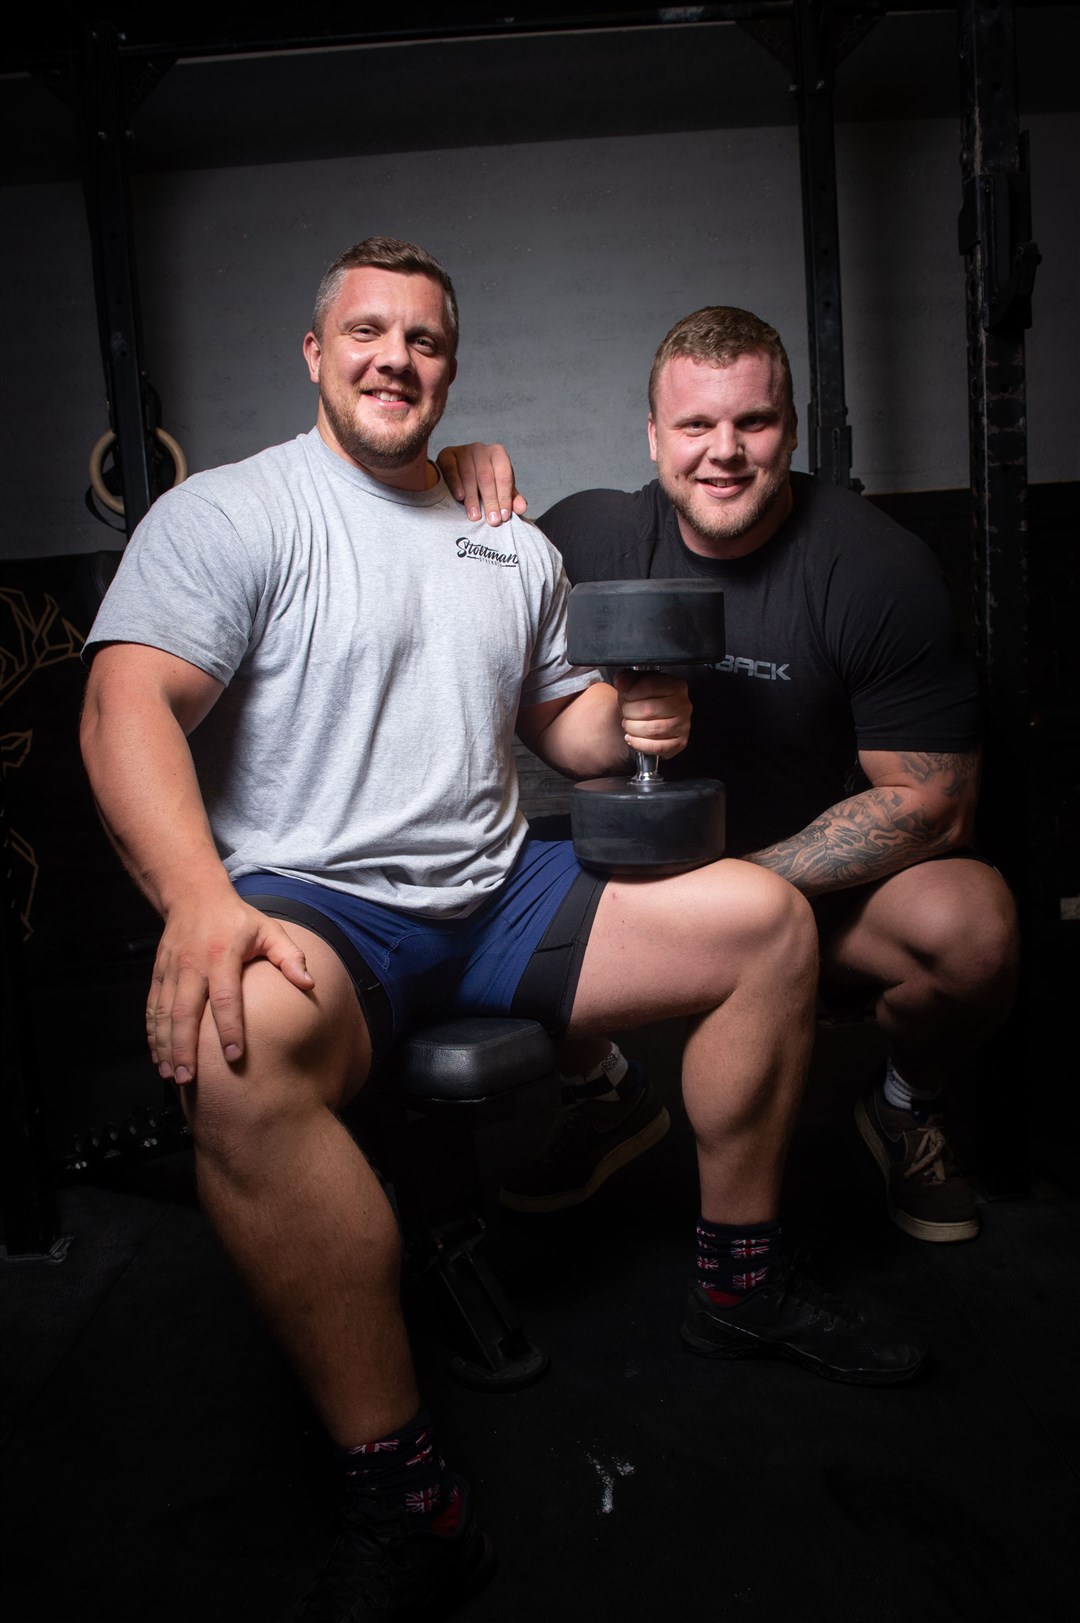 Rossshire brothers have sights set on Britain's Strongest Man title